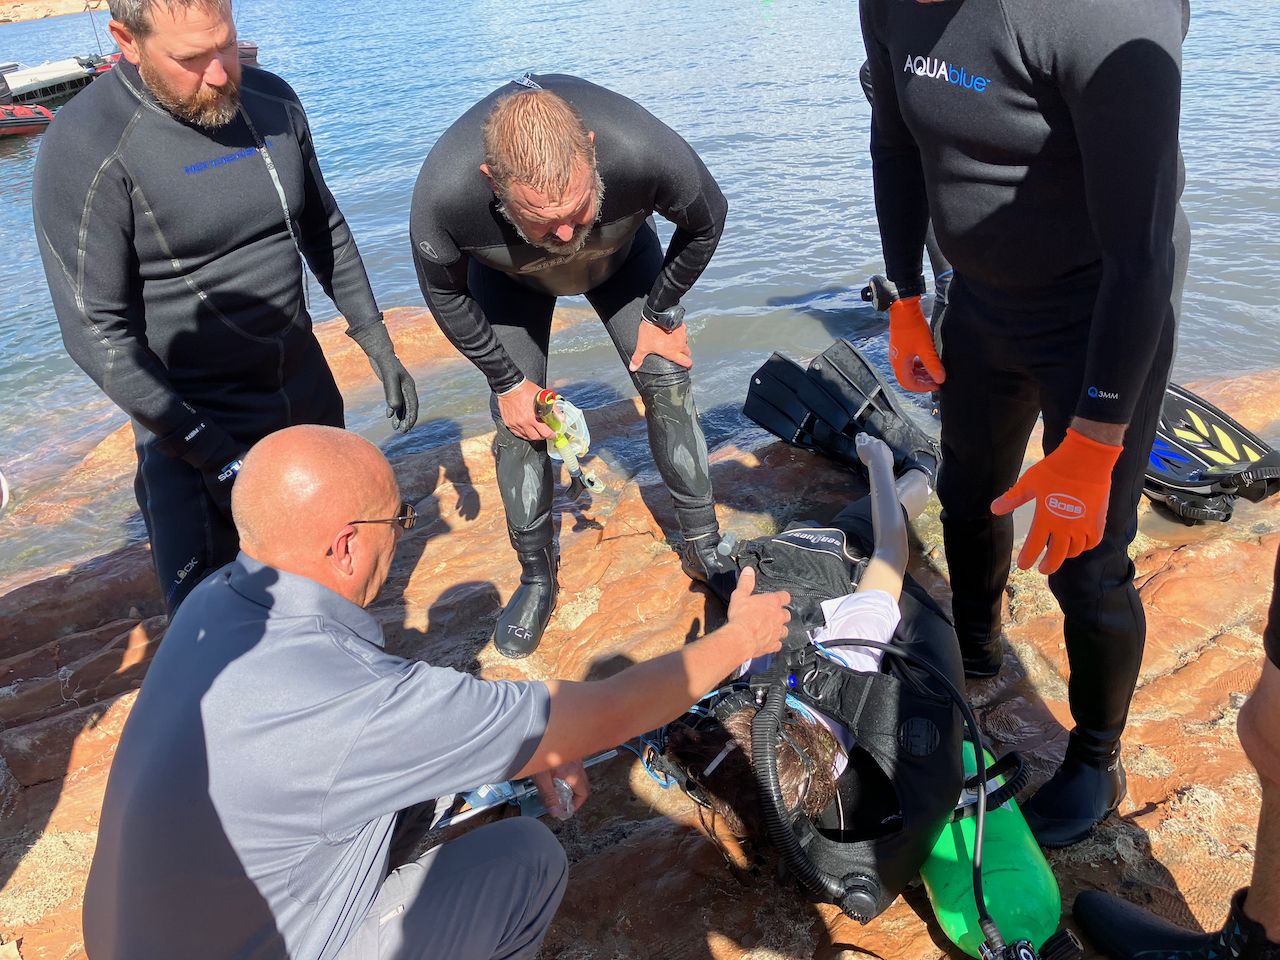 diver recovery team - 1 (3).jpeg